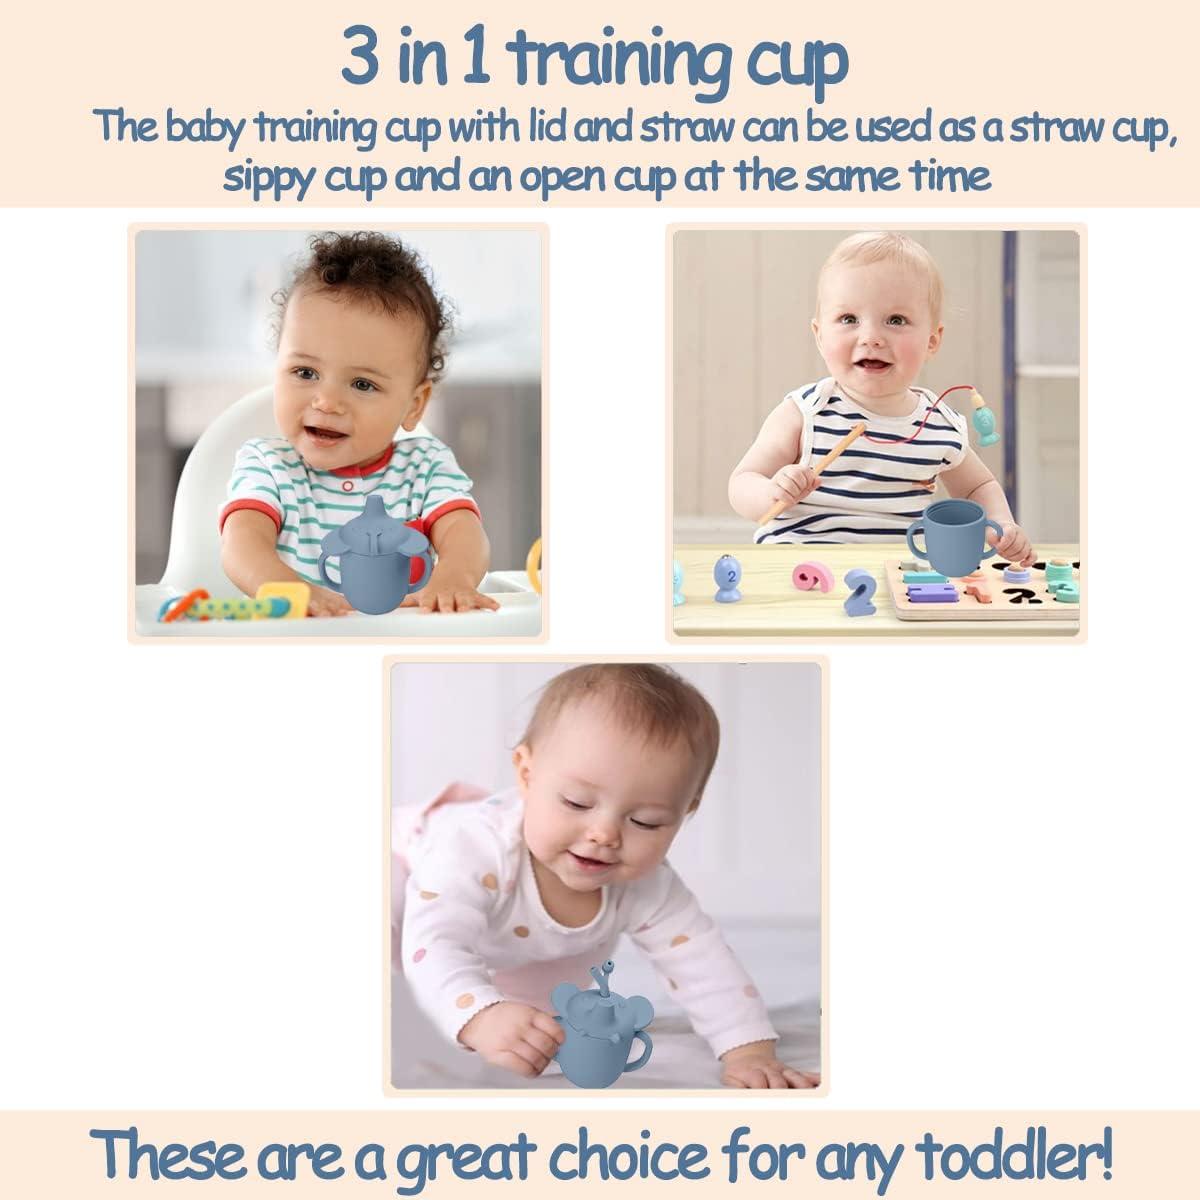 Sippy cups? Straw? Regular cups? which one is best for my child